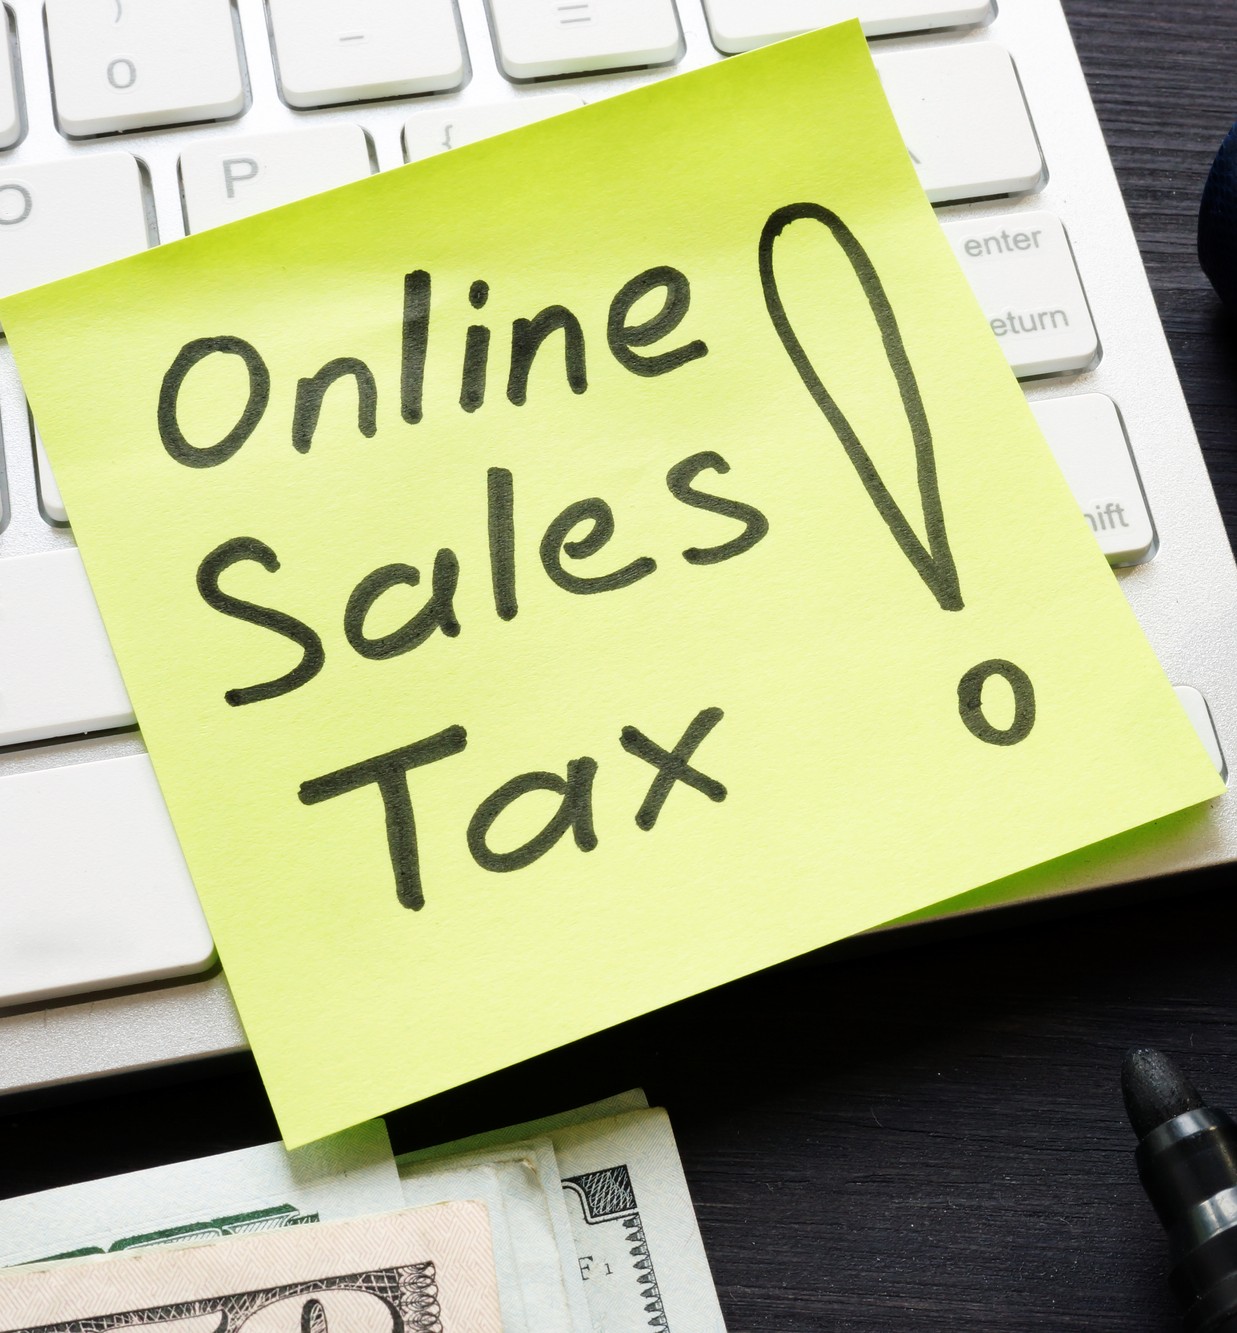 Ecommerce Sales and Use Tax Service